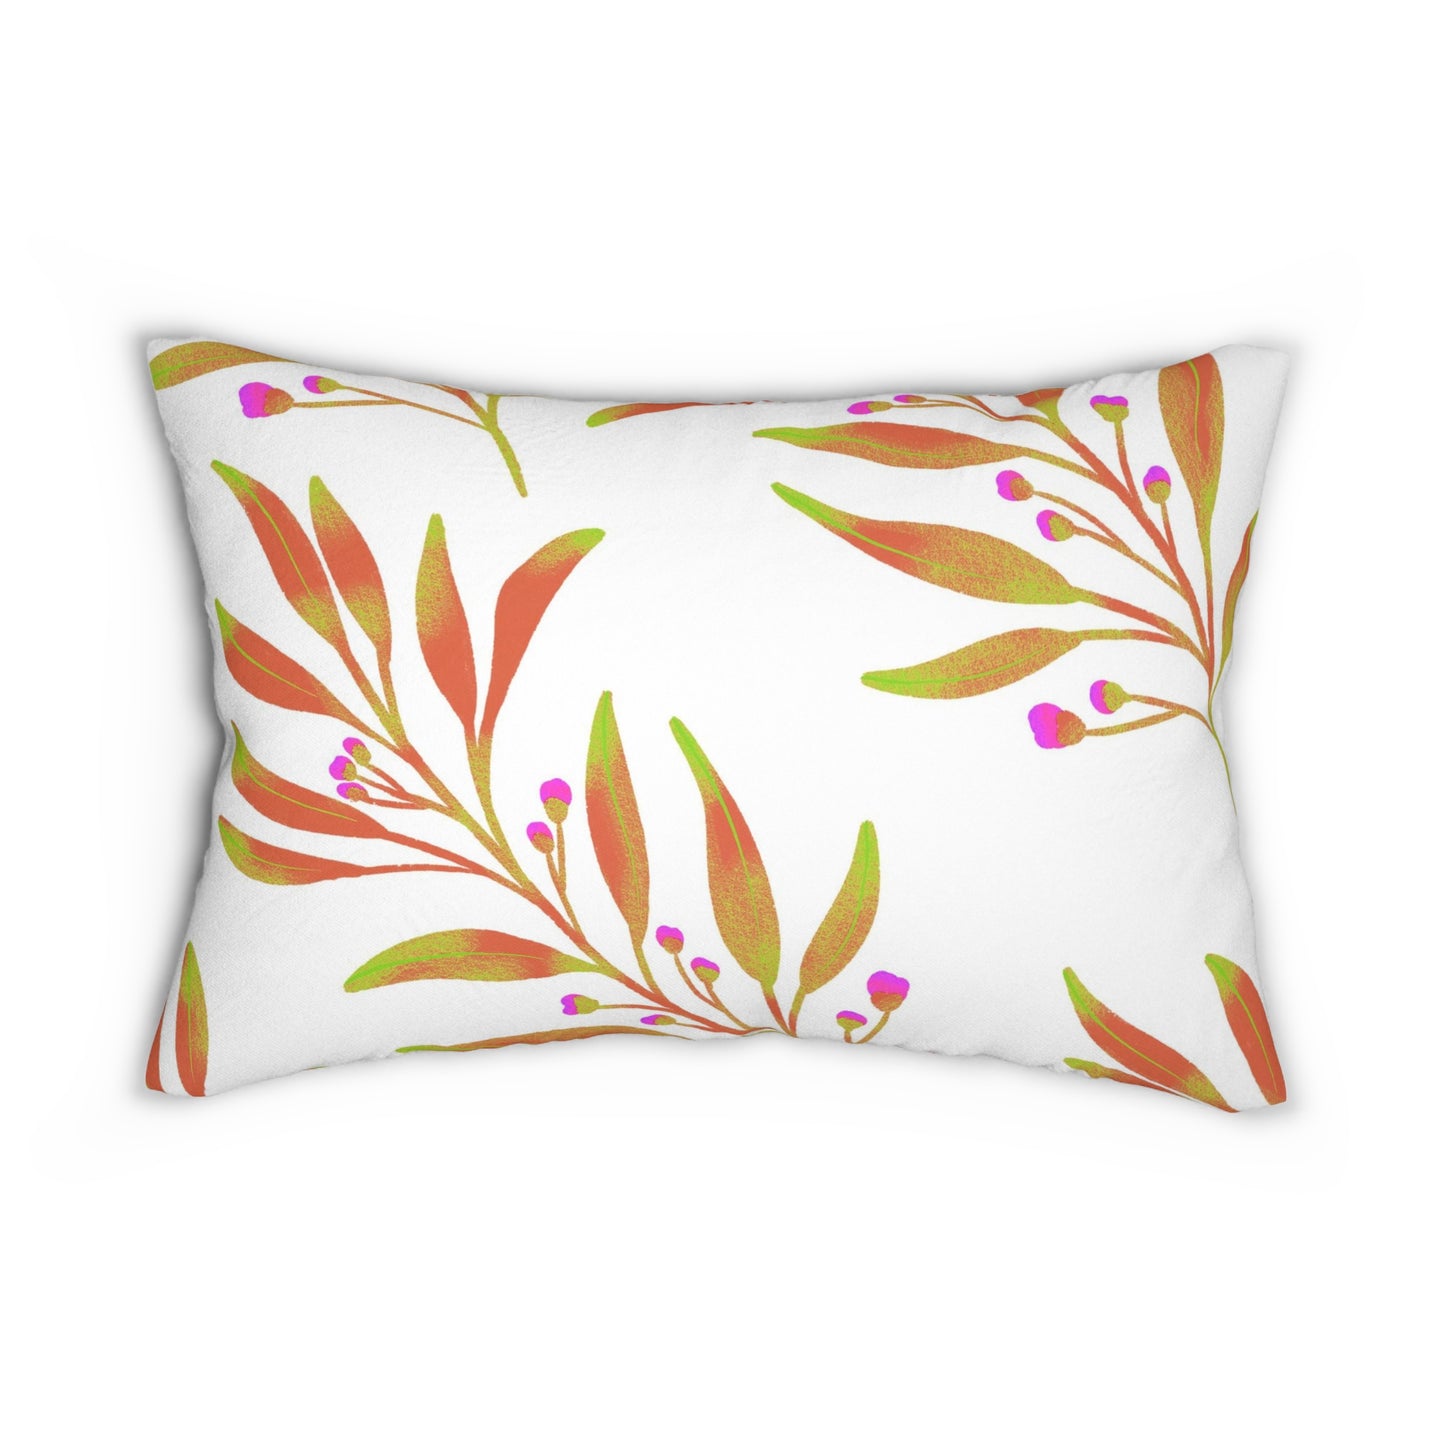 Lumbar Pillow With Pillow Insert In White Rusty Leaves Pattern 20"x14"